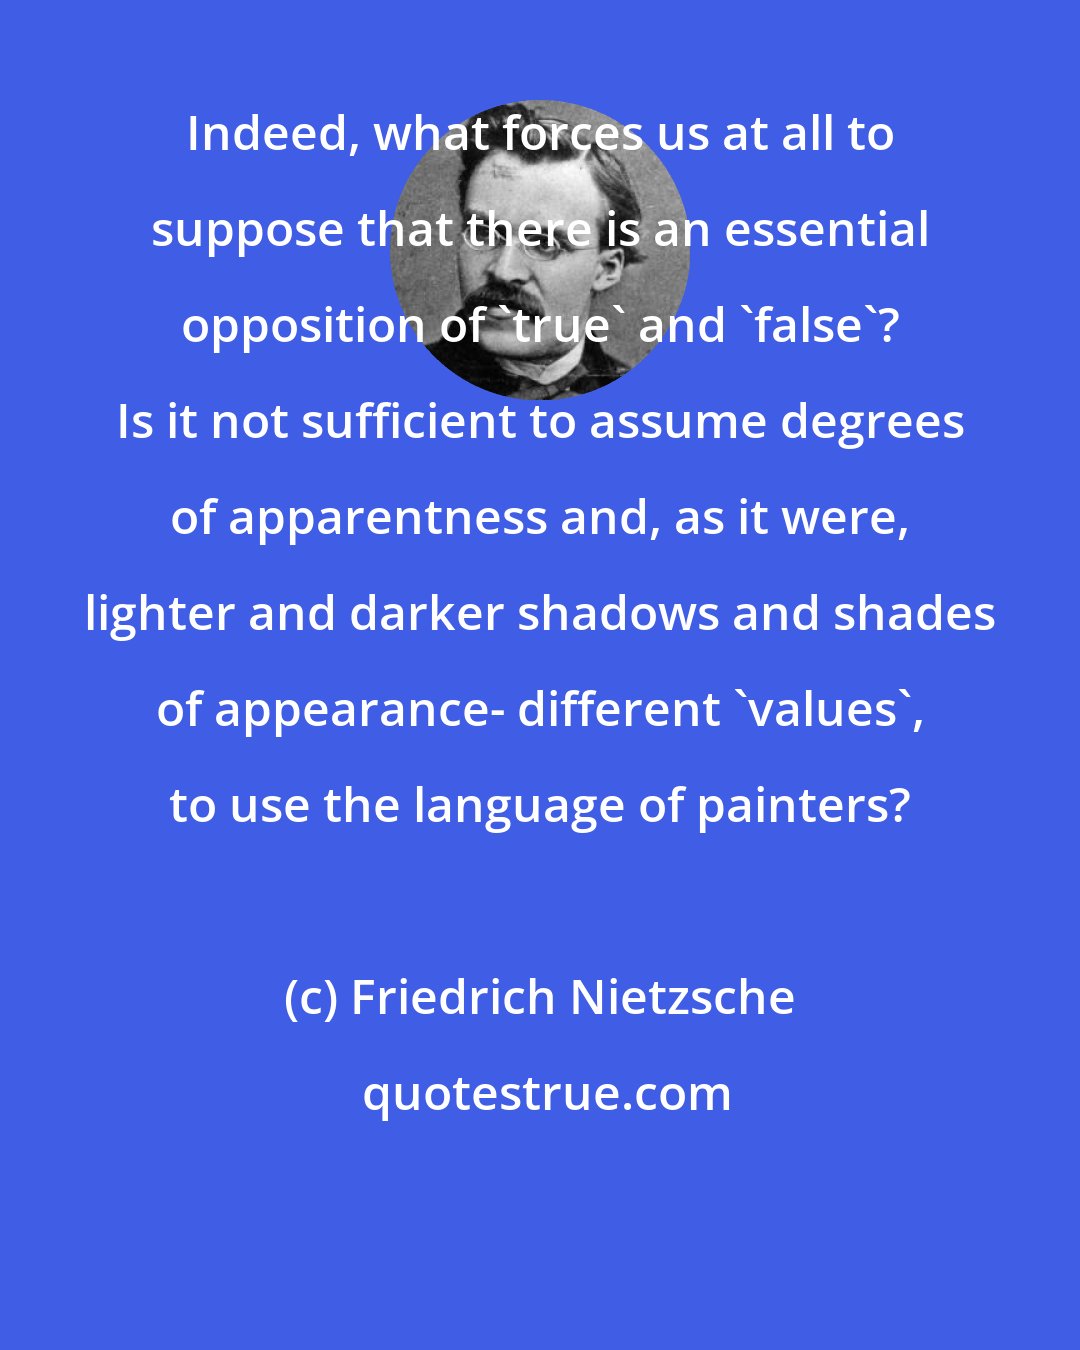 Friedrich Nietzsche: Indeed, what forces us at all to suppose that there is an essential opposition of 'true' and 'false'? Is it not sufficient to assume degrees of apparentness and, as it were, lighter and darker shadows and shades of appearance- different 'values', to use the language of painters?